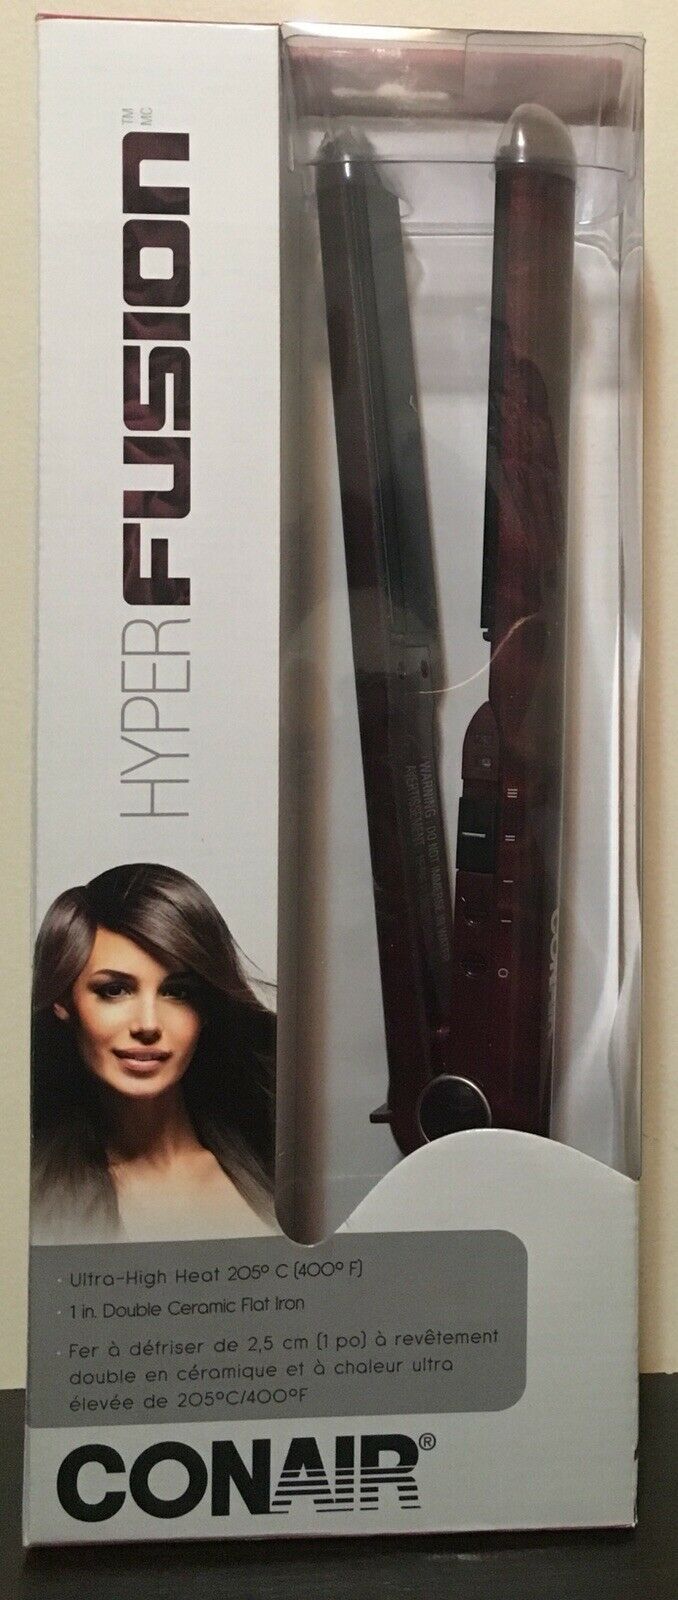 Primary image for infinitiPRO by Conair 1 Inch Double Ceramic Flat Iron